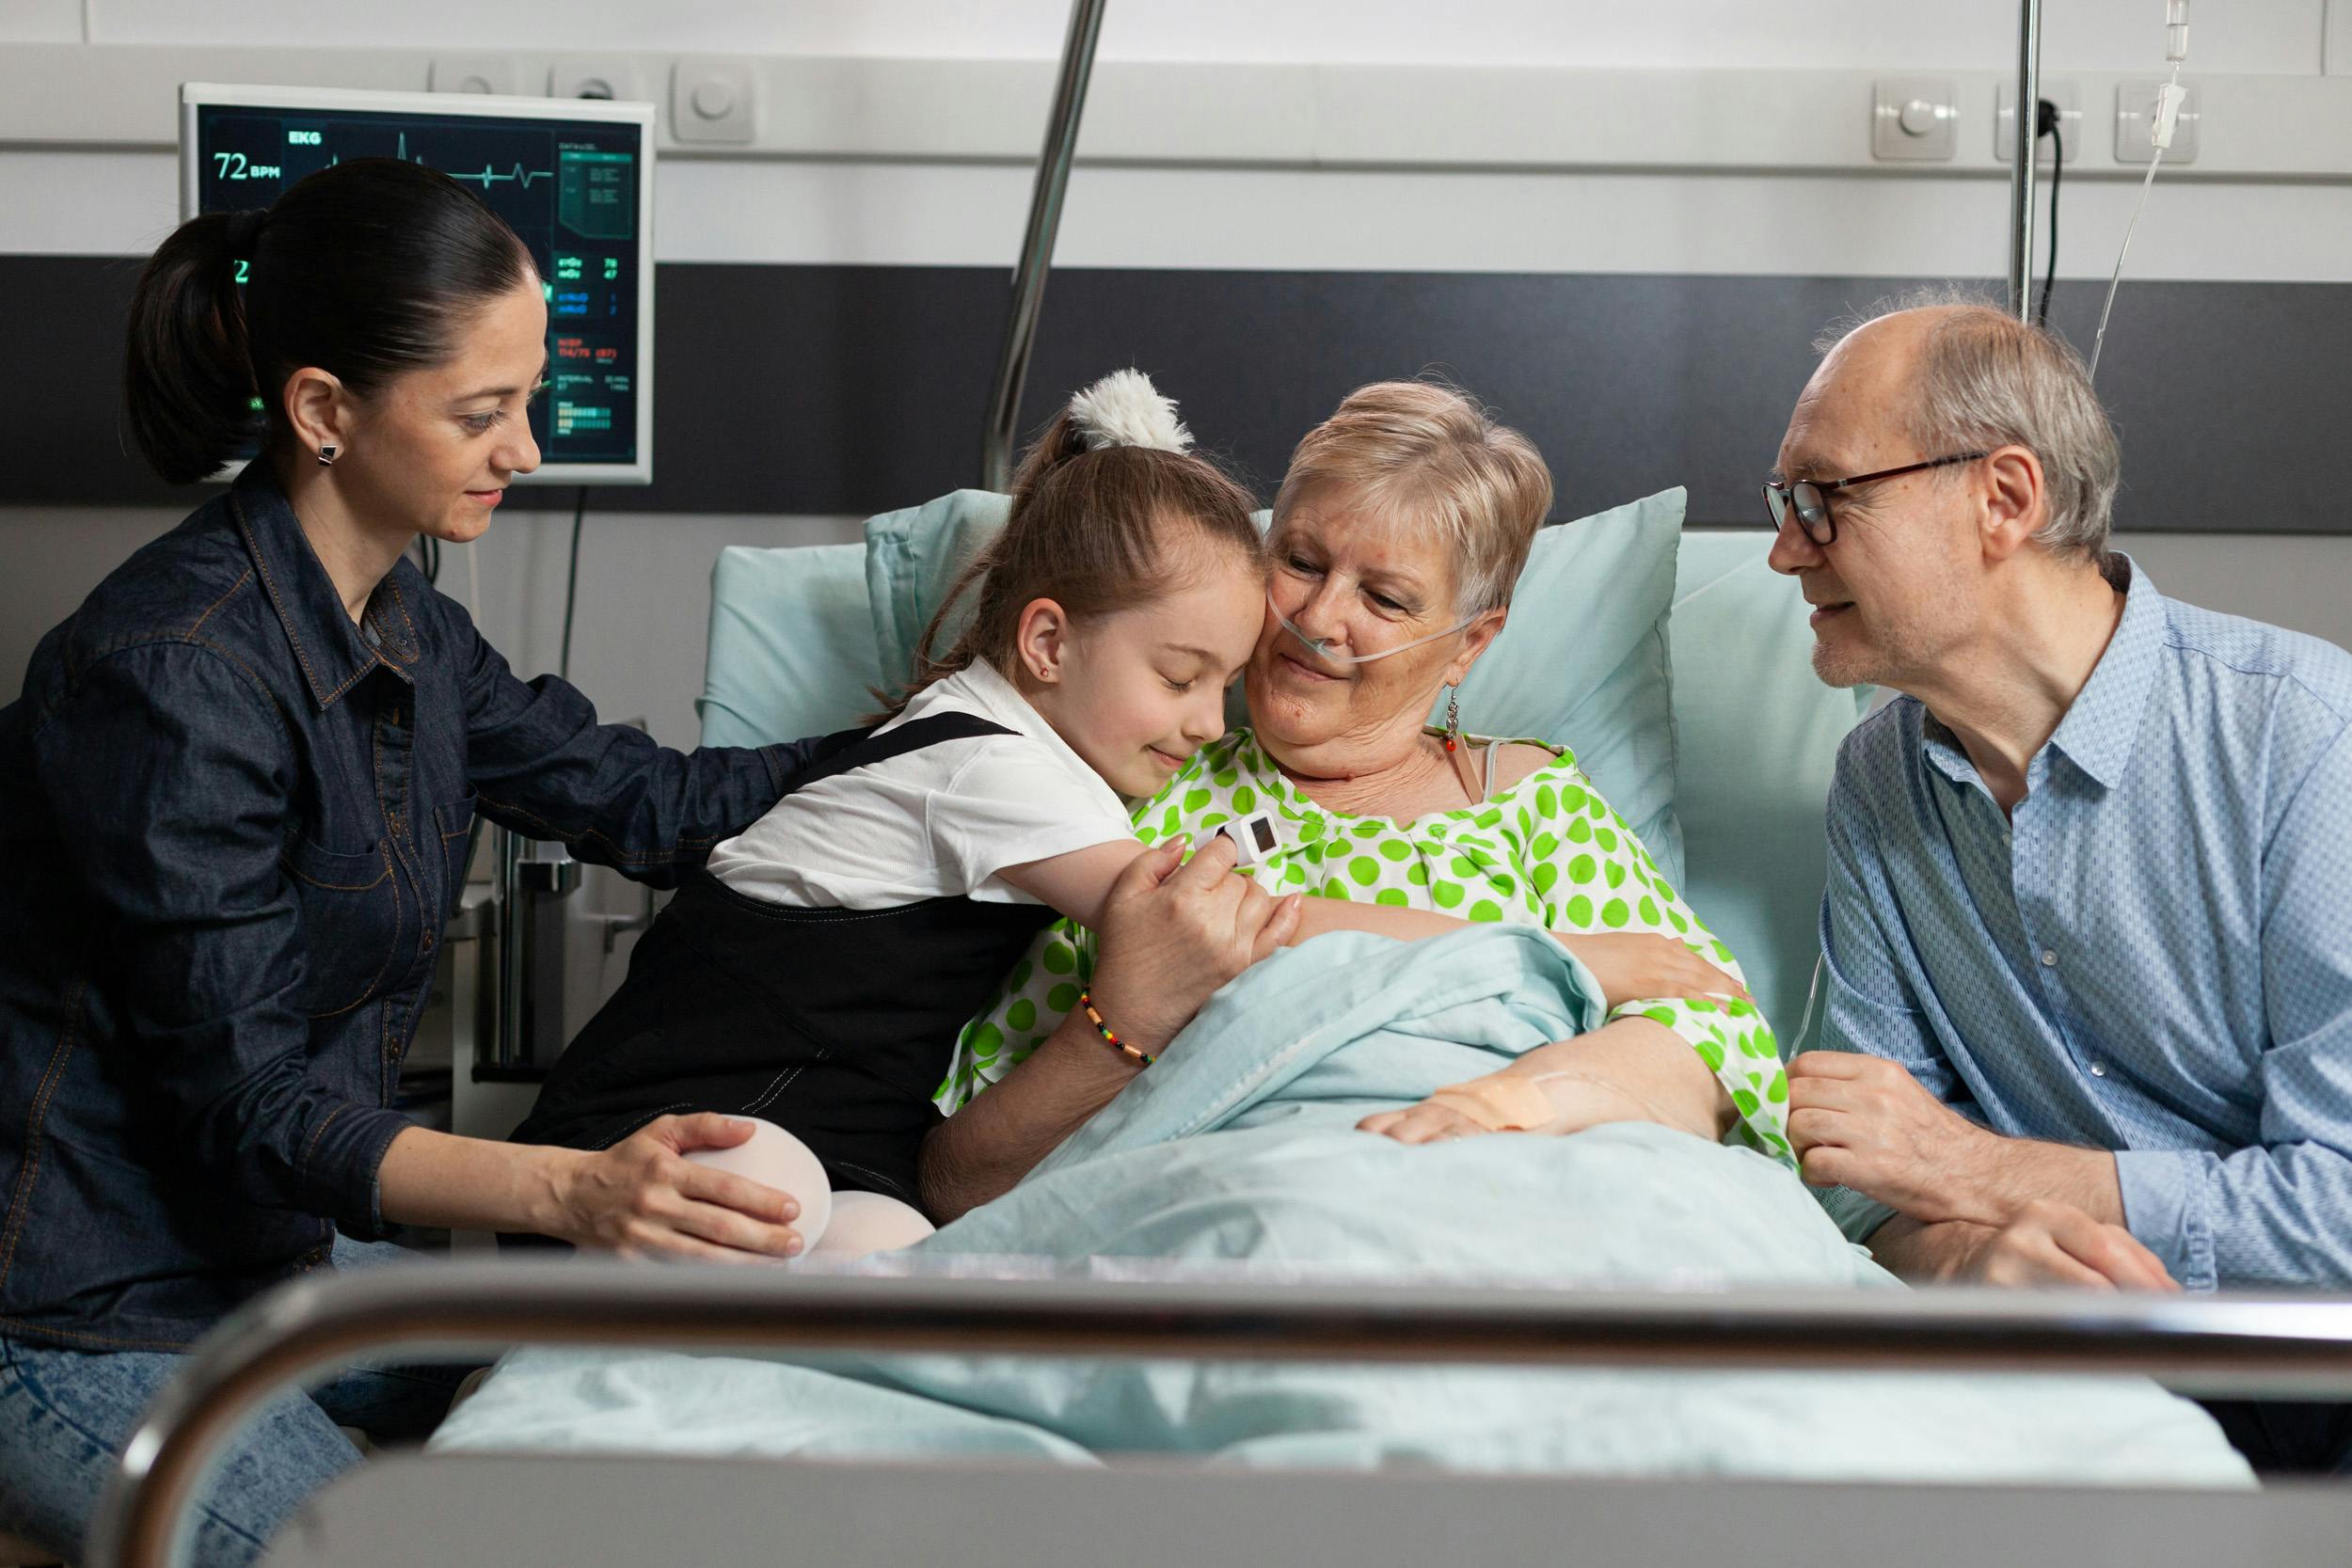 Elderly woman with an oxygen tube in a hospital bed holds her granddaughter while an elderly man looks on lovingly.